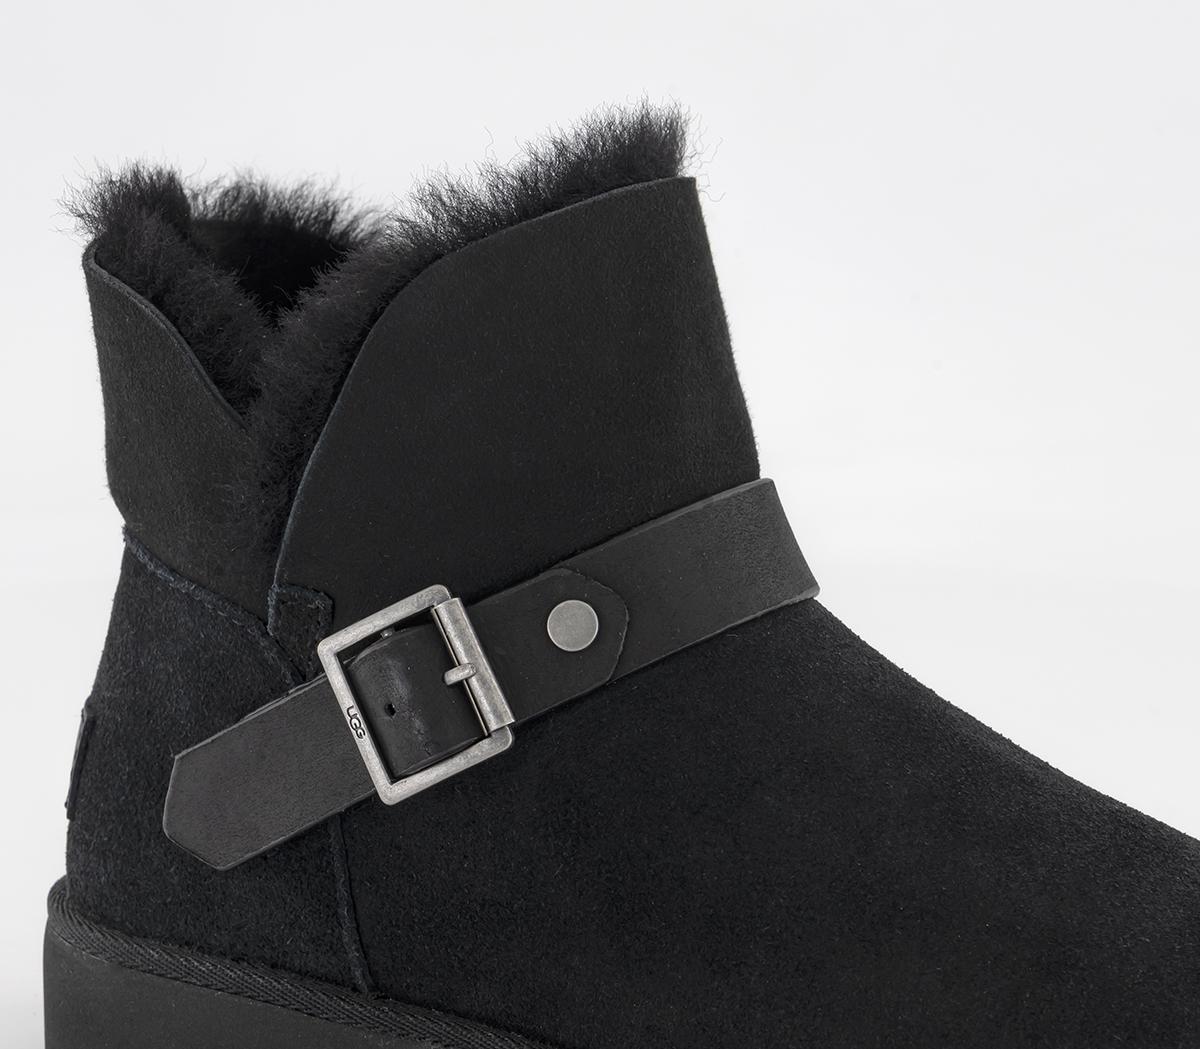 UGG Romely Short Buckle Boots Black - Women's Ankle Boots